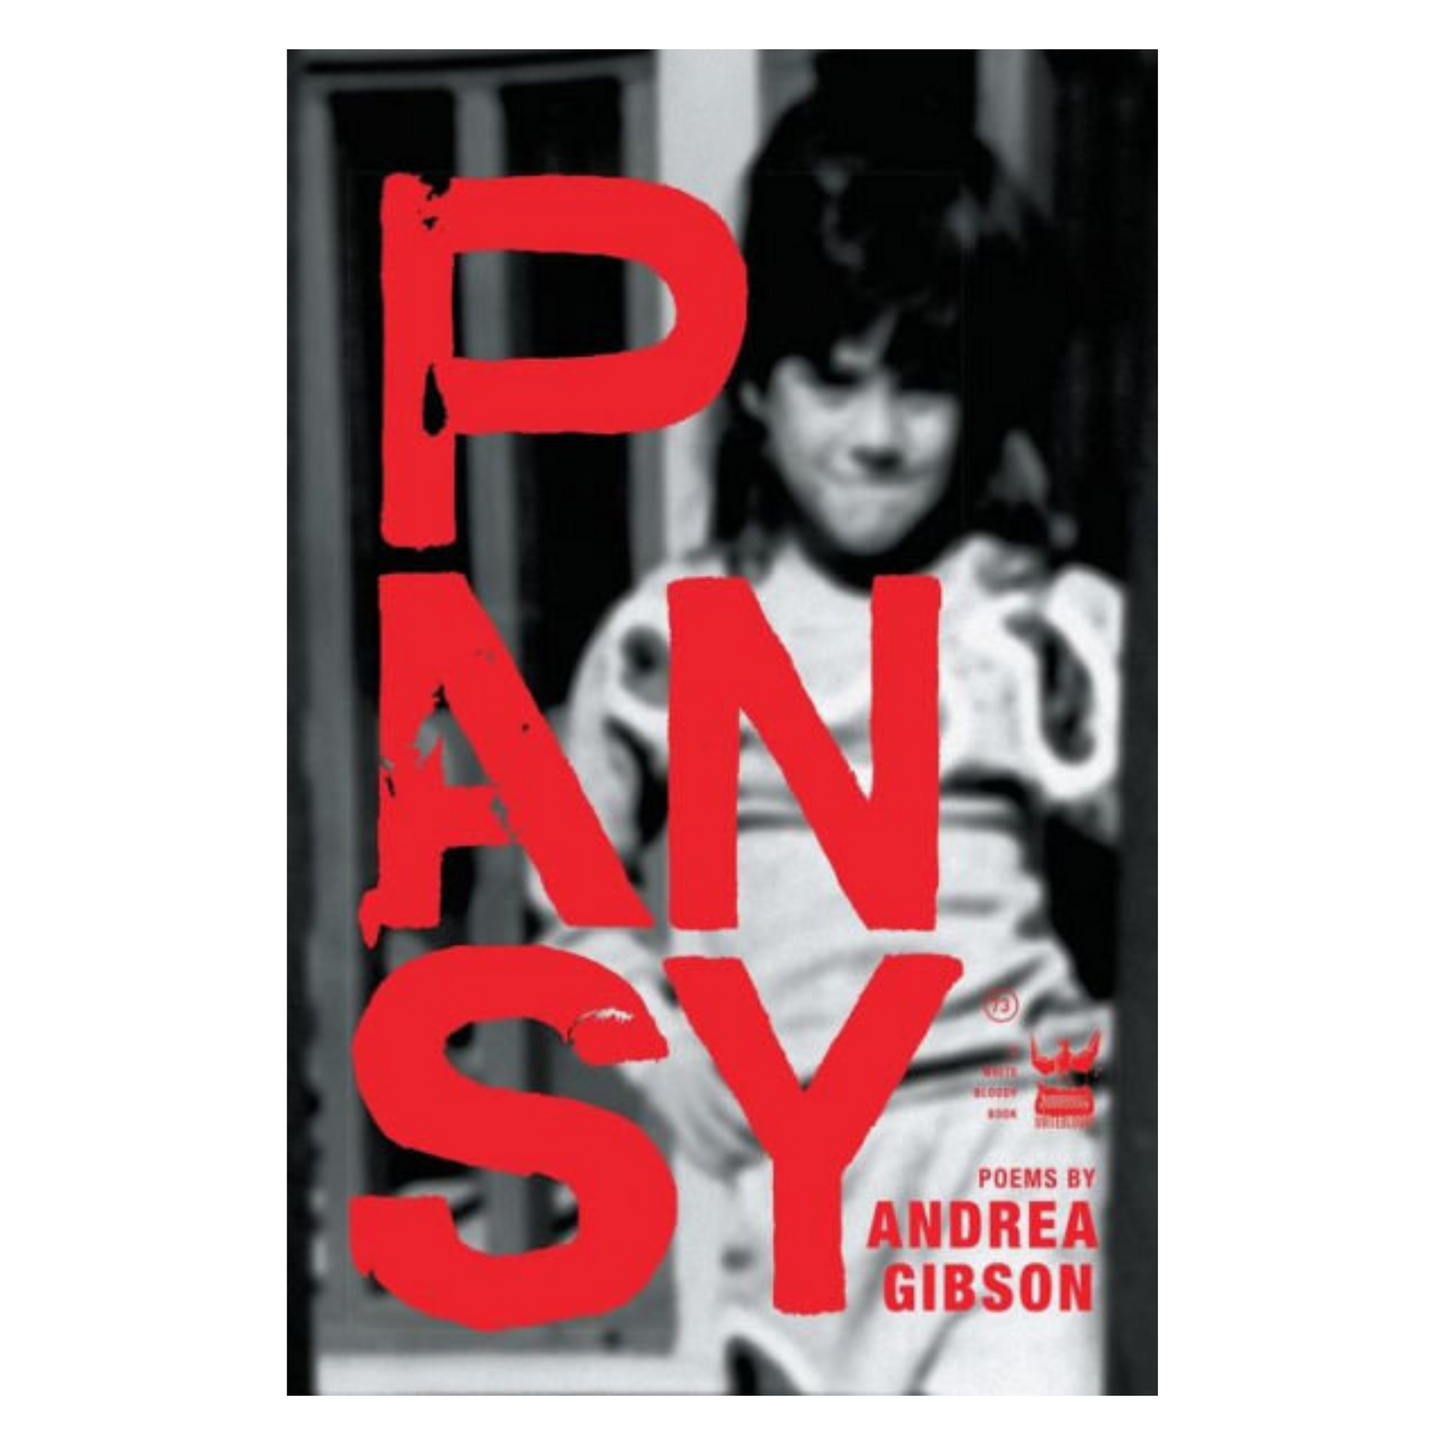 PANSY - SIGNED COPIES AVAILABLE